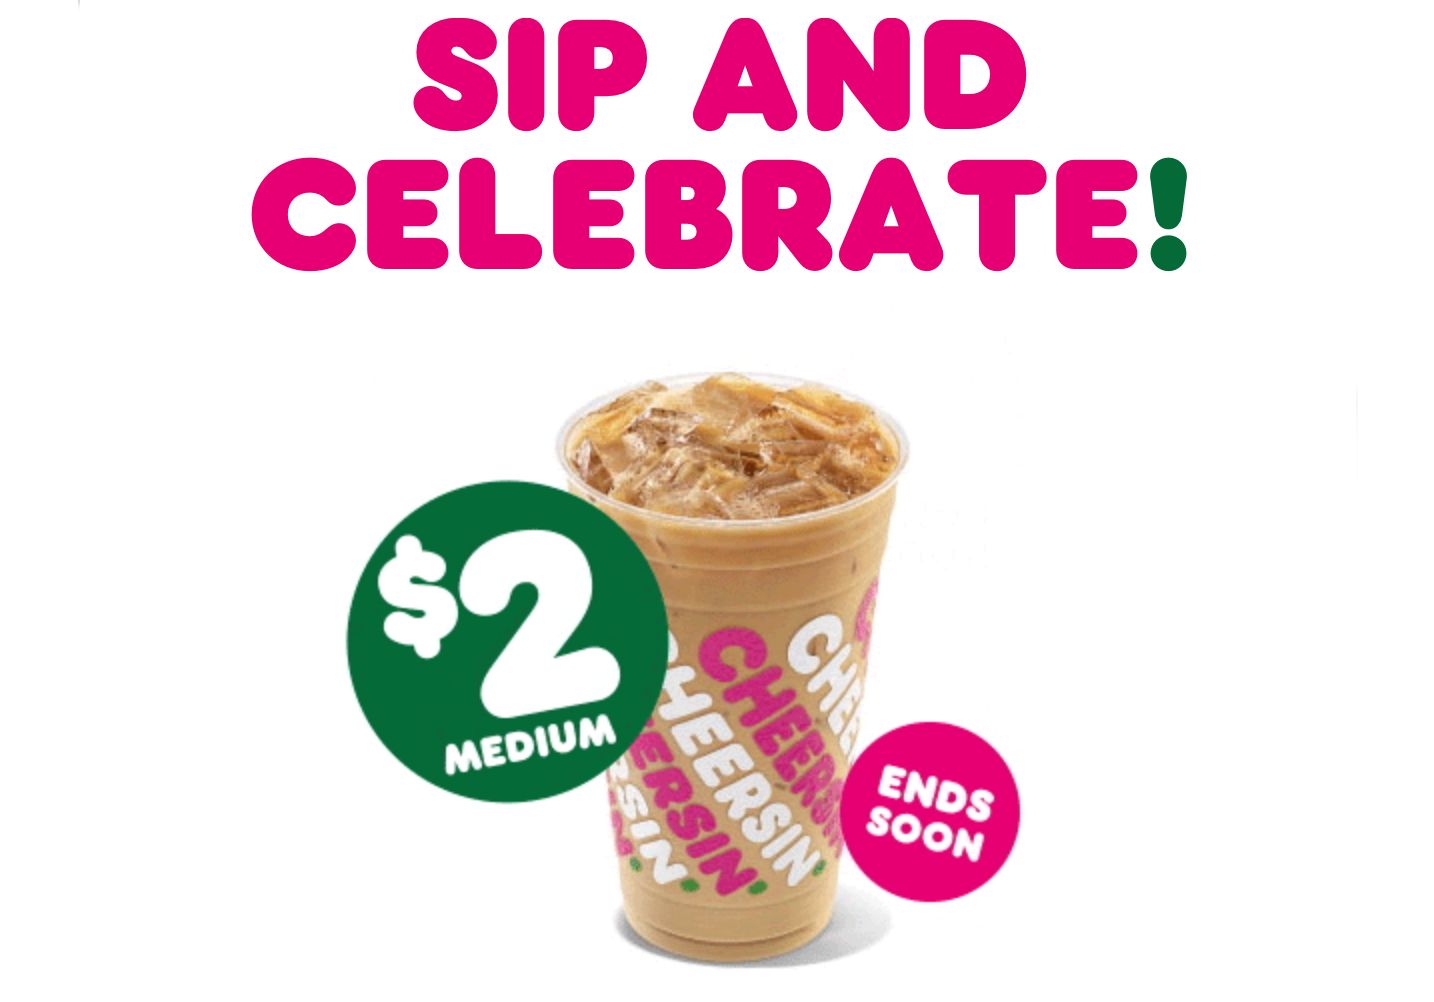 $2 Medium Iced Coffees Offered for a Limited Time Only to DD Perks Rewards Members